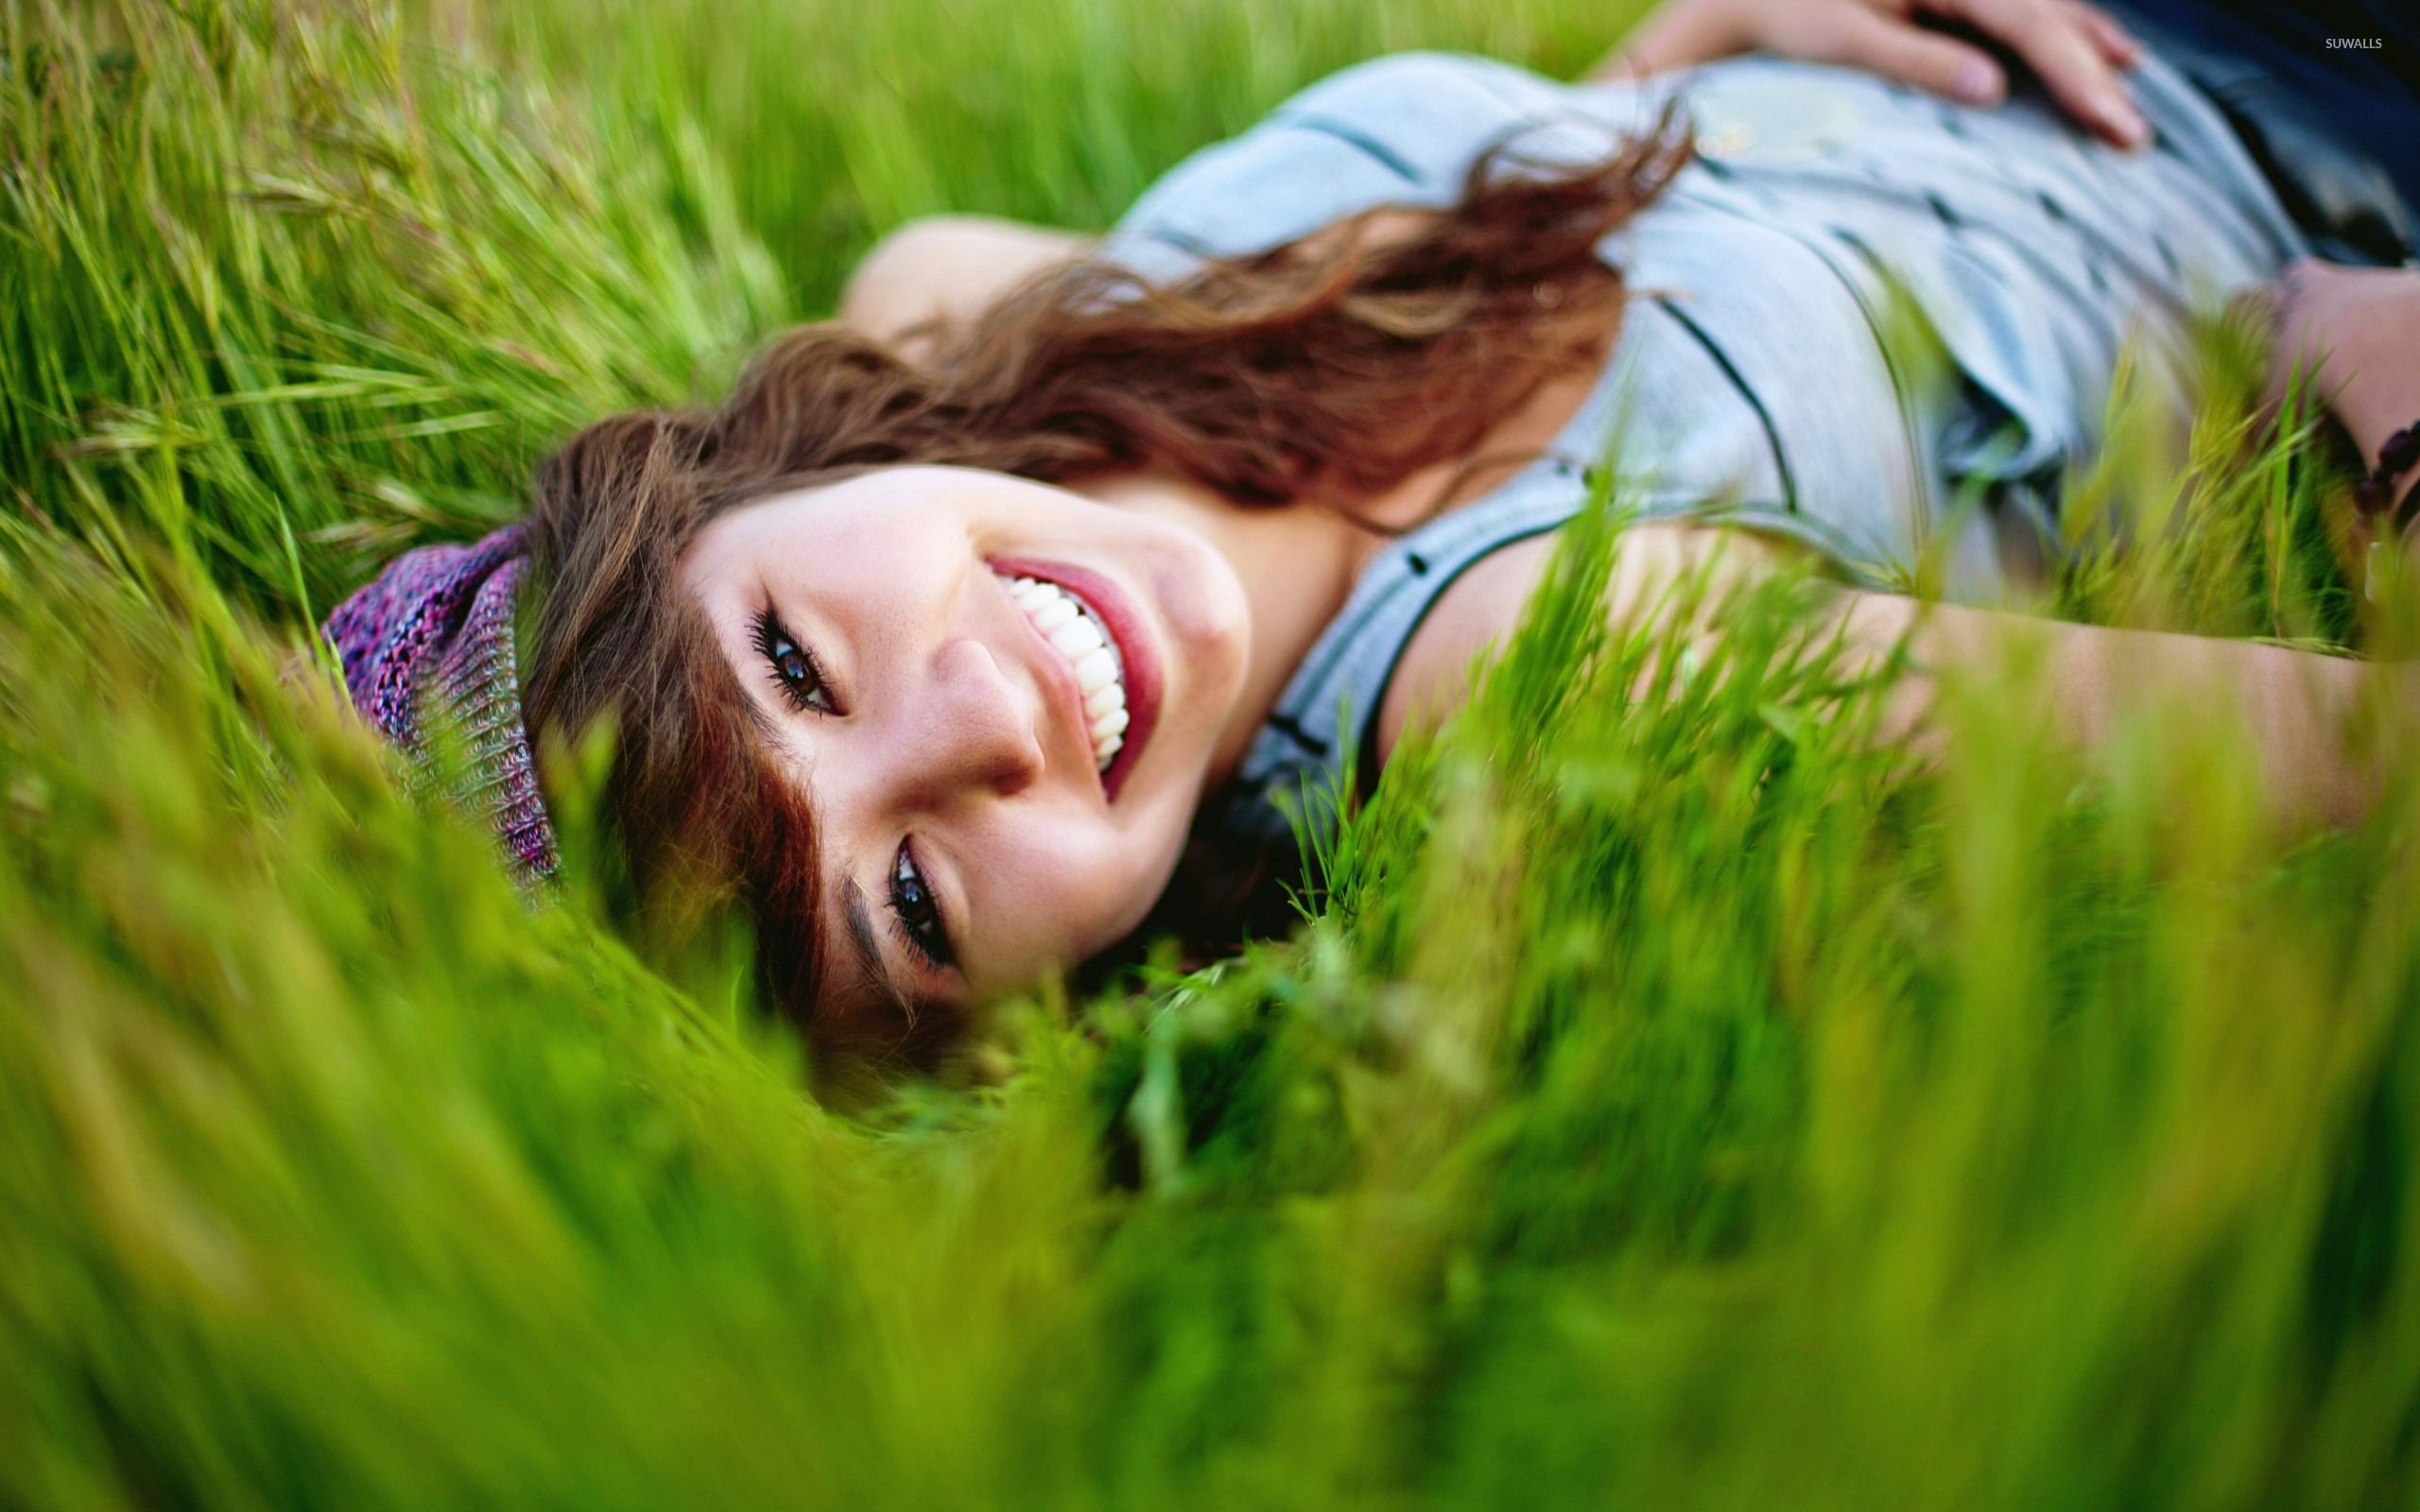 wallpaper for girls,people in nature,grass,nature,green,beauty